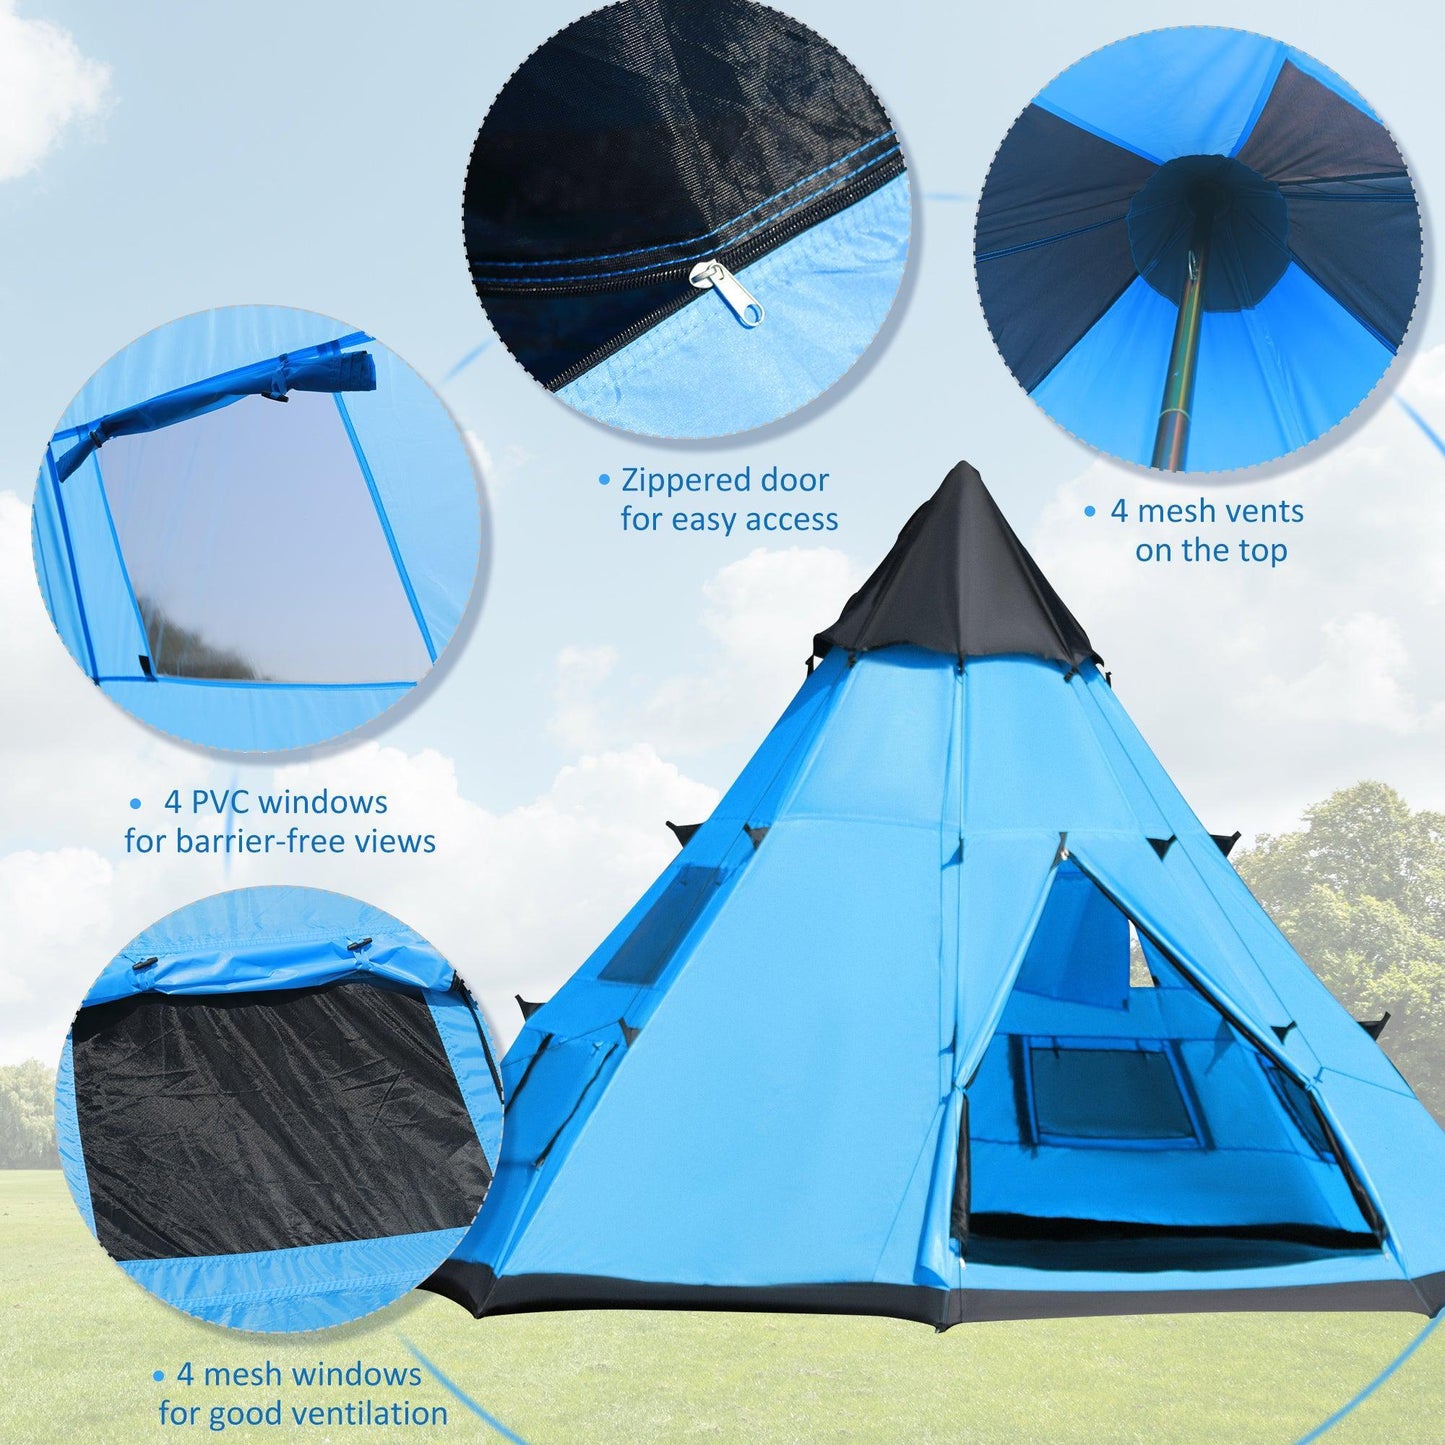 Outsunny 6-Person Teepee Tent, Easy Assembly, Blue - ALL4U RETAILER LTD